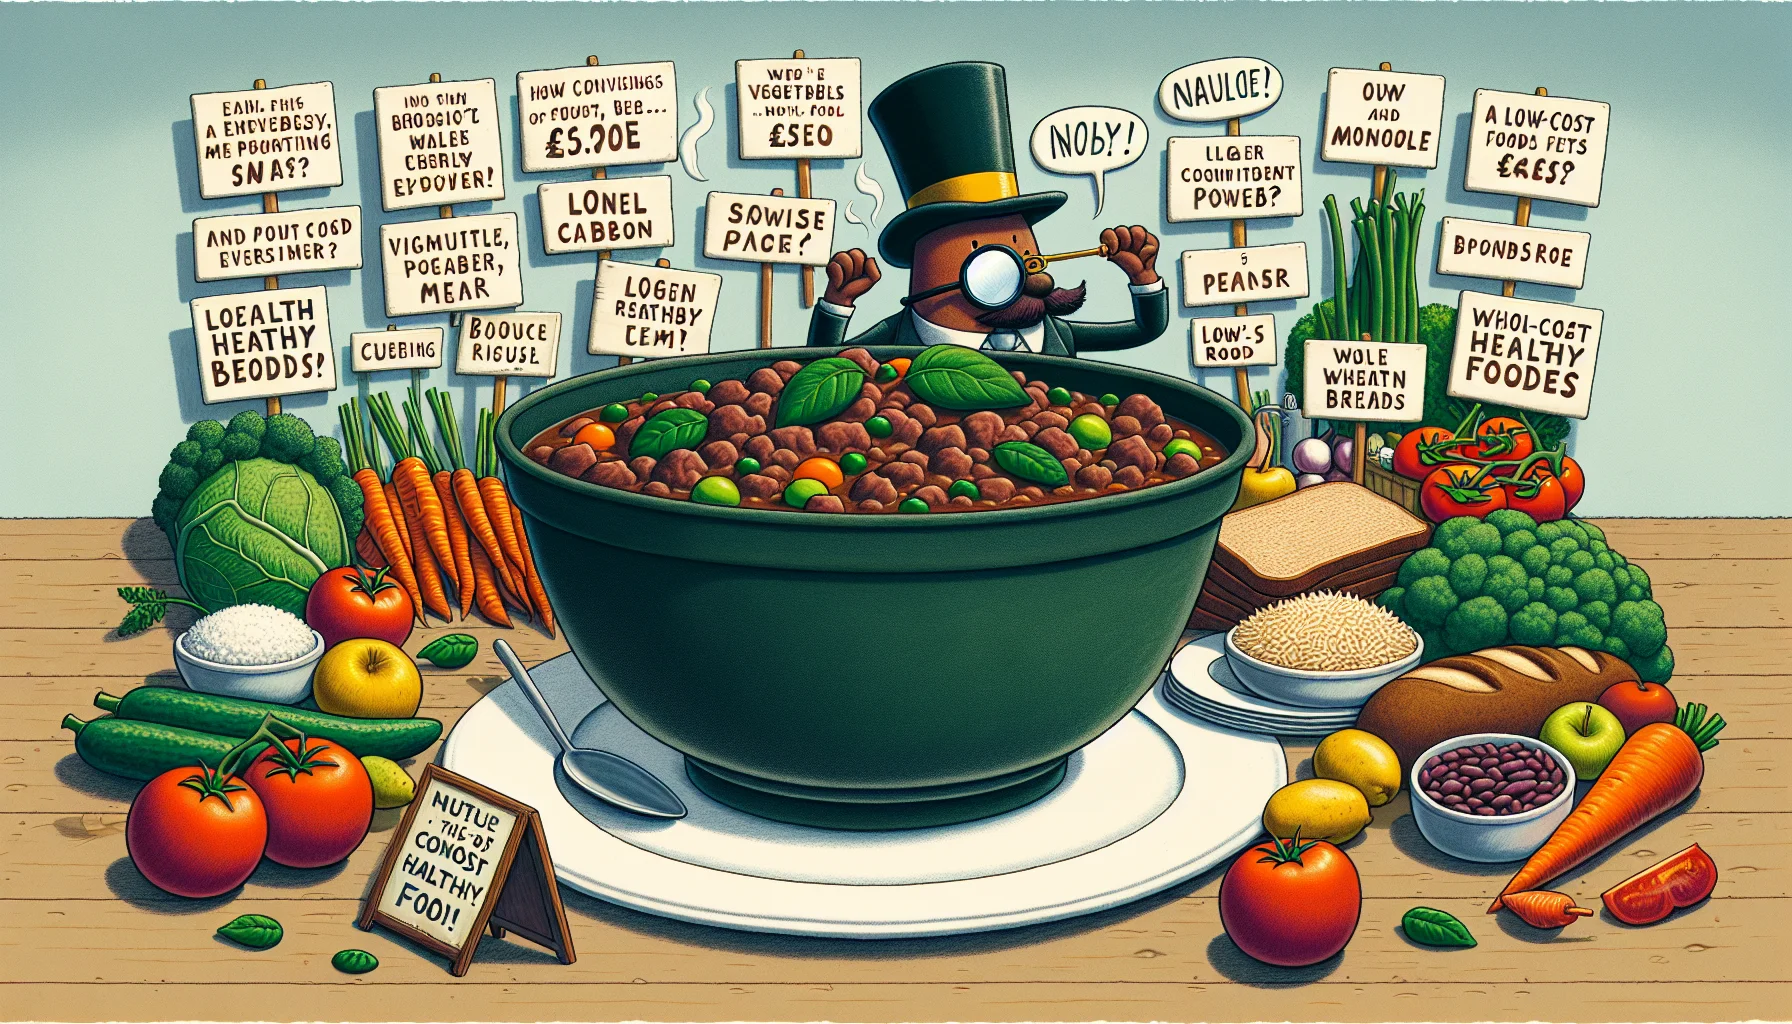 Visualize a comical scenario where a large, beautifully prepared bowl of beef stew is animatedly engaged in convincing a range of fruits, vegetables, and low-cost healthy foods about the value of pairing with it. The stew may adopt a convincing posture, wearing a top hat and monocle, while the fruits and veggies exhibit various reactions, from skepticism to enthusiasm. The scene incorporates many of these food items such as carrots, tomatoes and potatoes, brown rice, beans, whole wheat breads - suggesting a presence in a lively market environment or a lively kitchen. The theme of the illustration should emphasize affordability and nutrition, with a lighthearted, appealing touch.